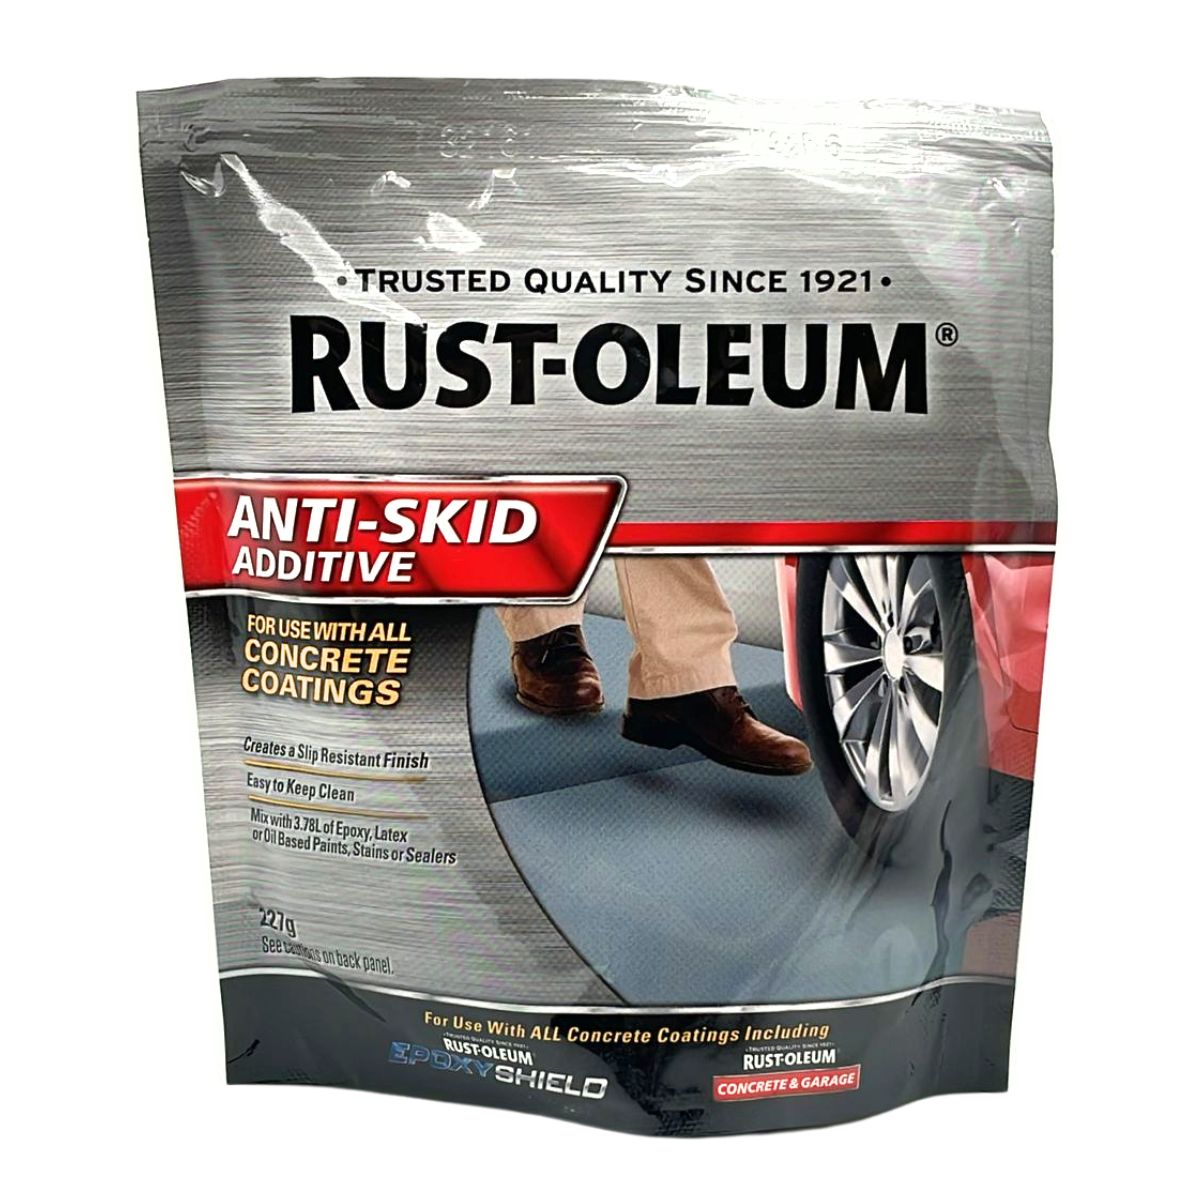 Rust-Oleum Concrete And Garage Anti-Skid Additive - South East Clearance Centre